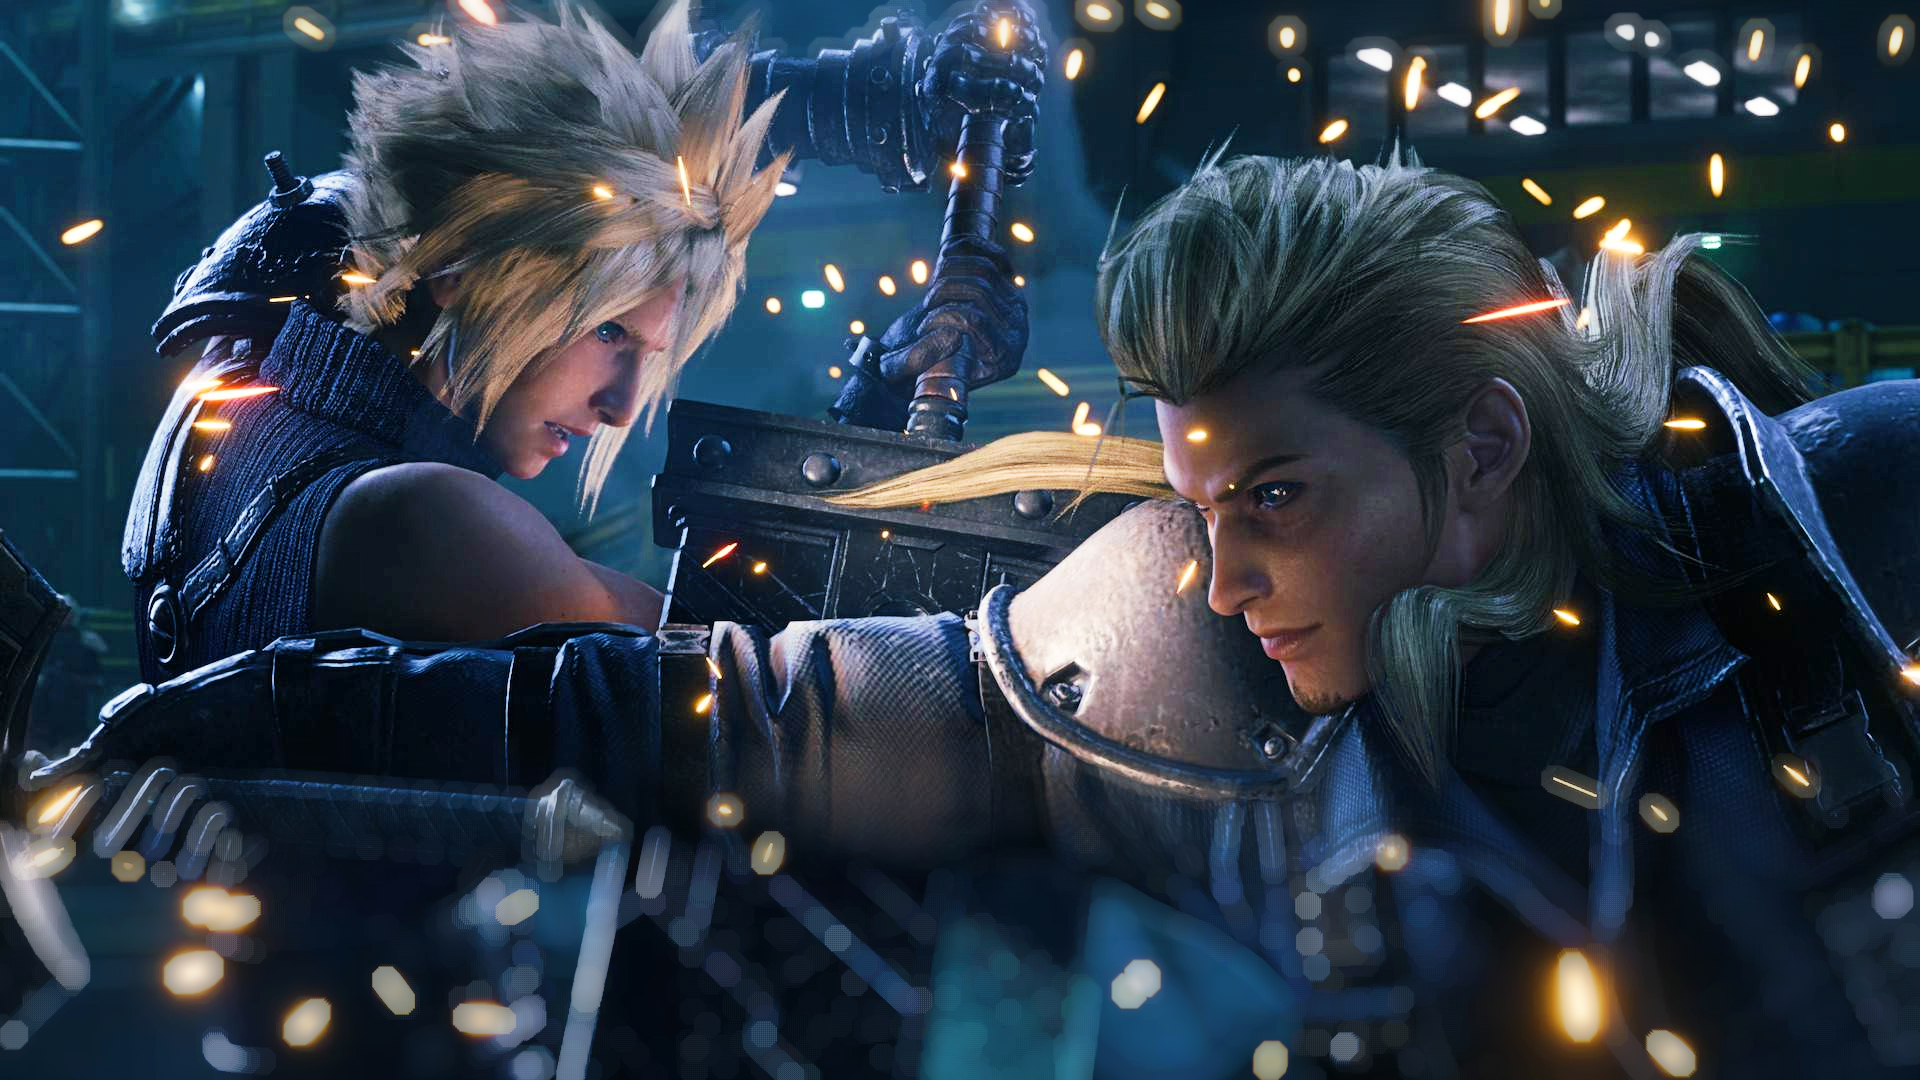 Will fans get to see an FF 8 remake after the FF 7 Remake?